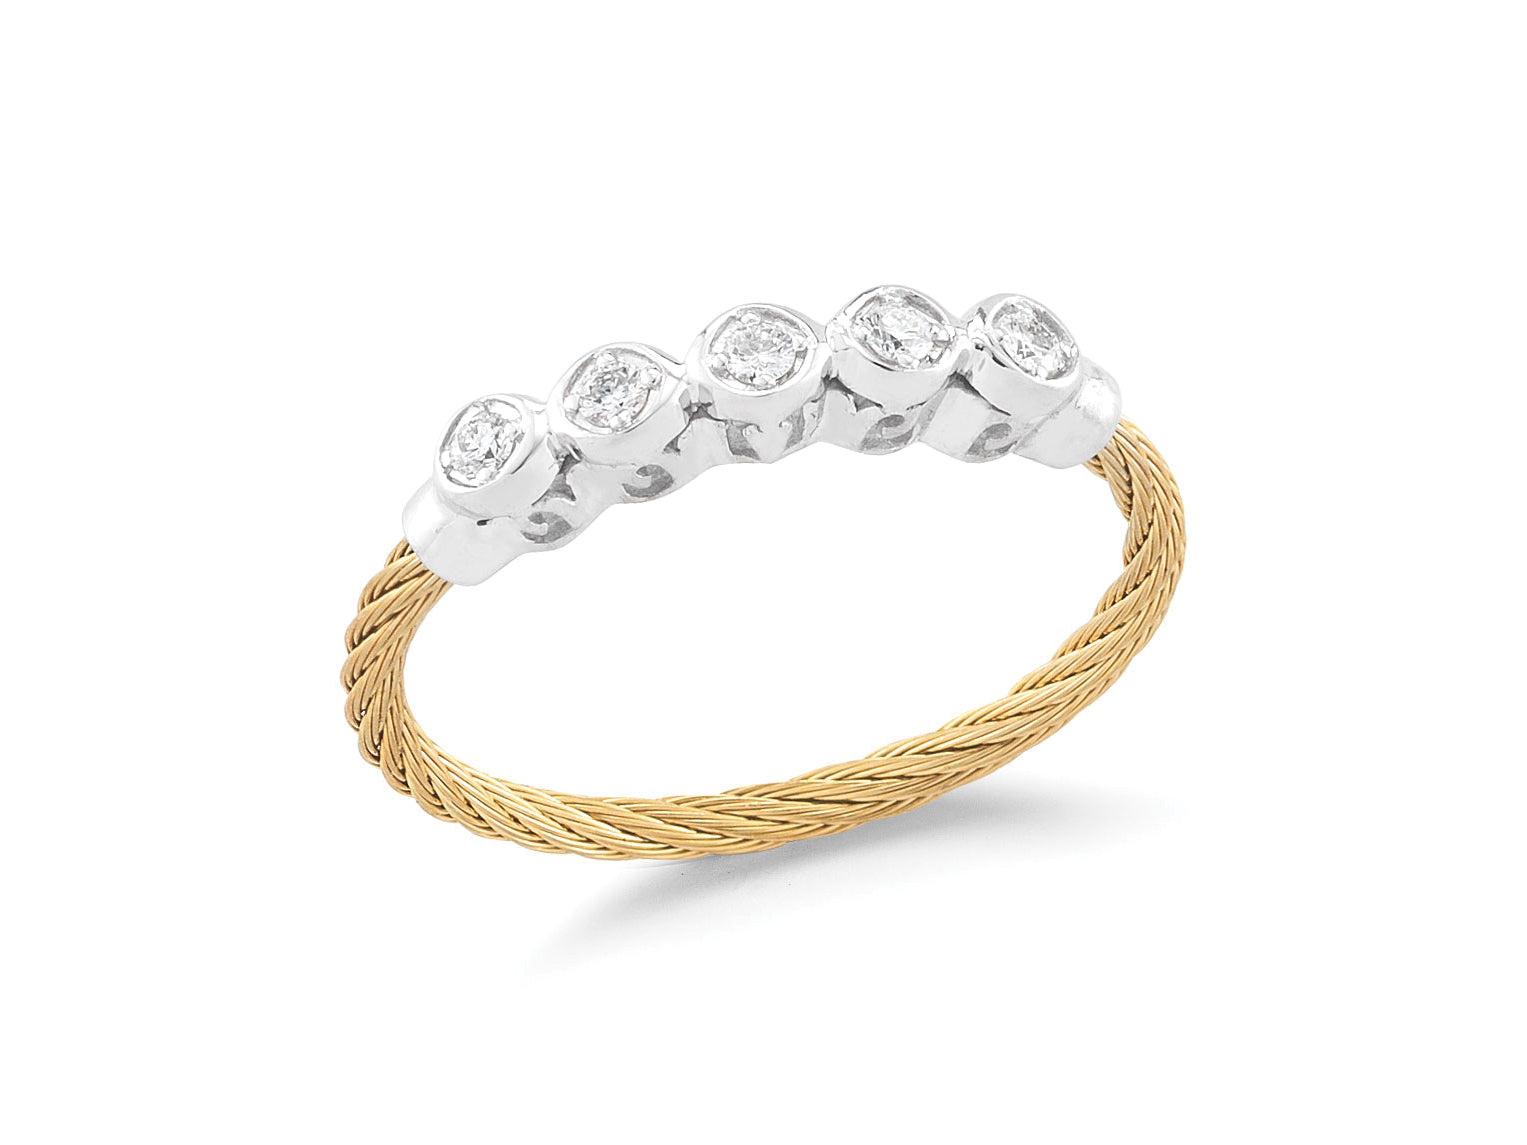 Alor Yellow cable, 18 karat White Gold, 0.11 total carat weight Diamonds with stainless steel. Imported.